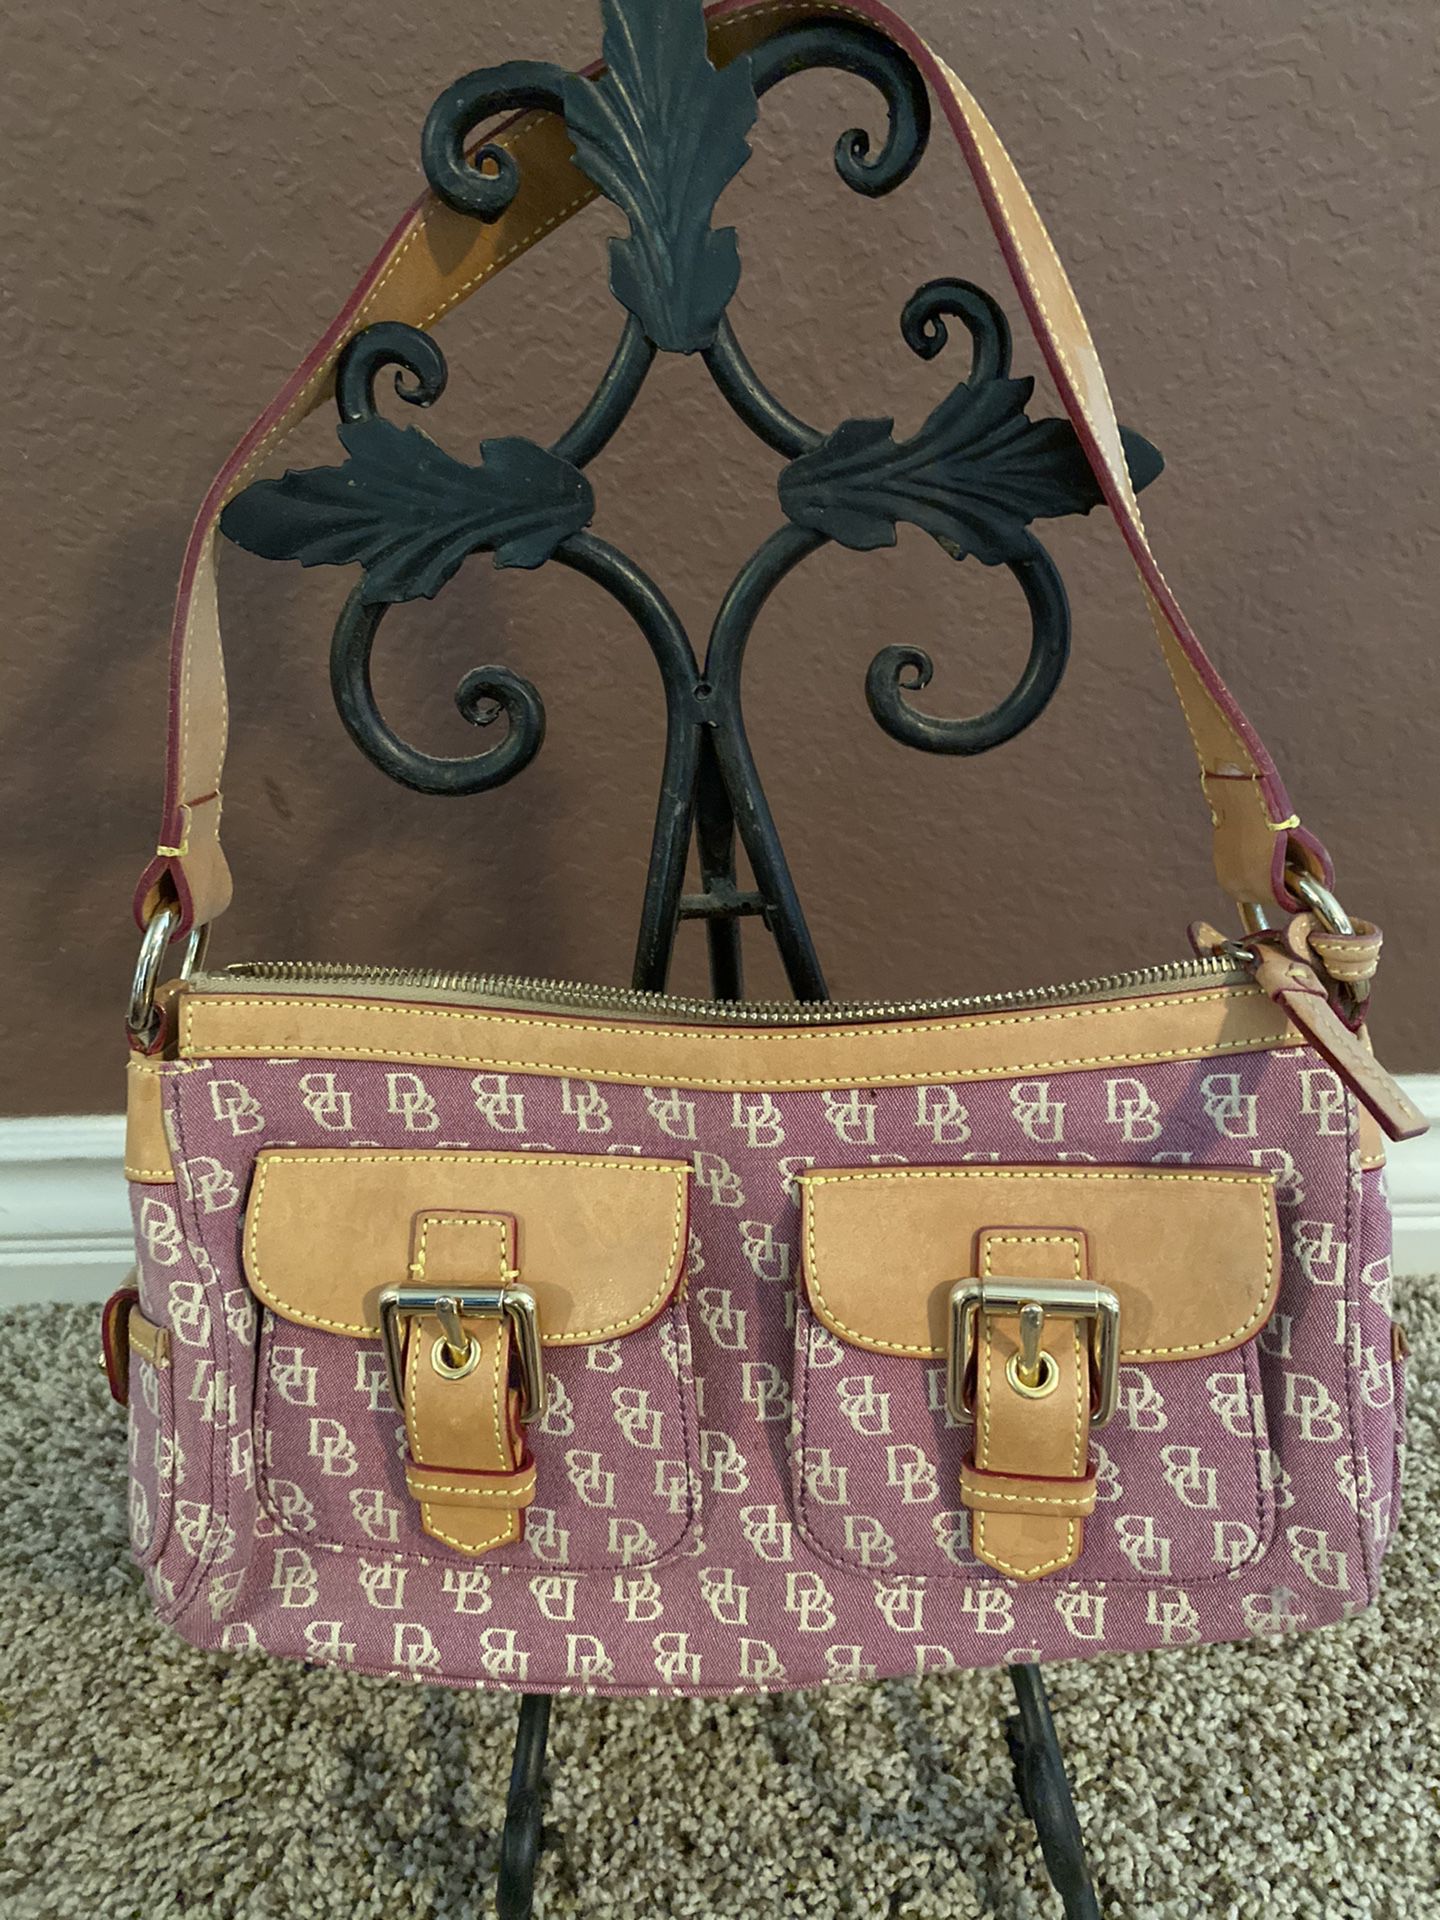 Dooney and Burke classic purse. Super cute for summer.